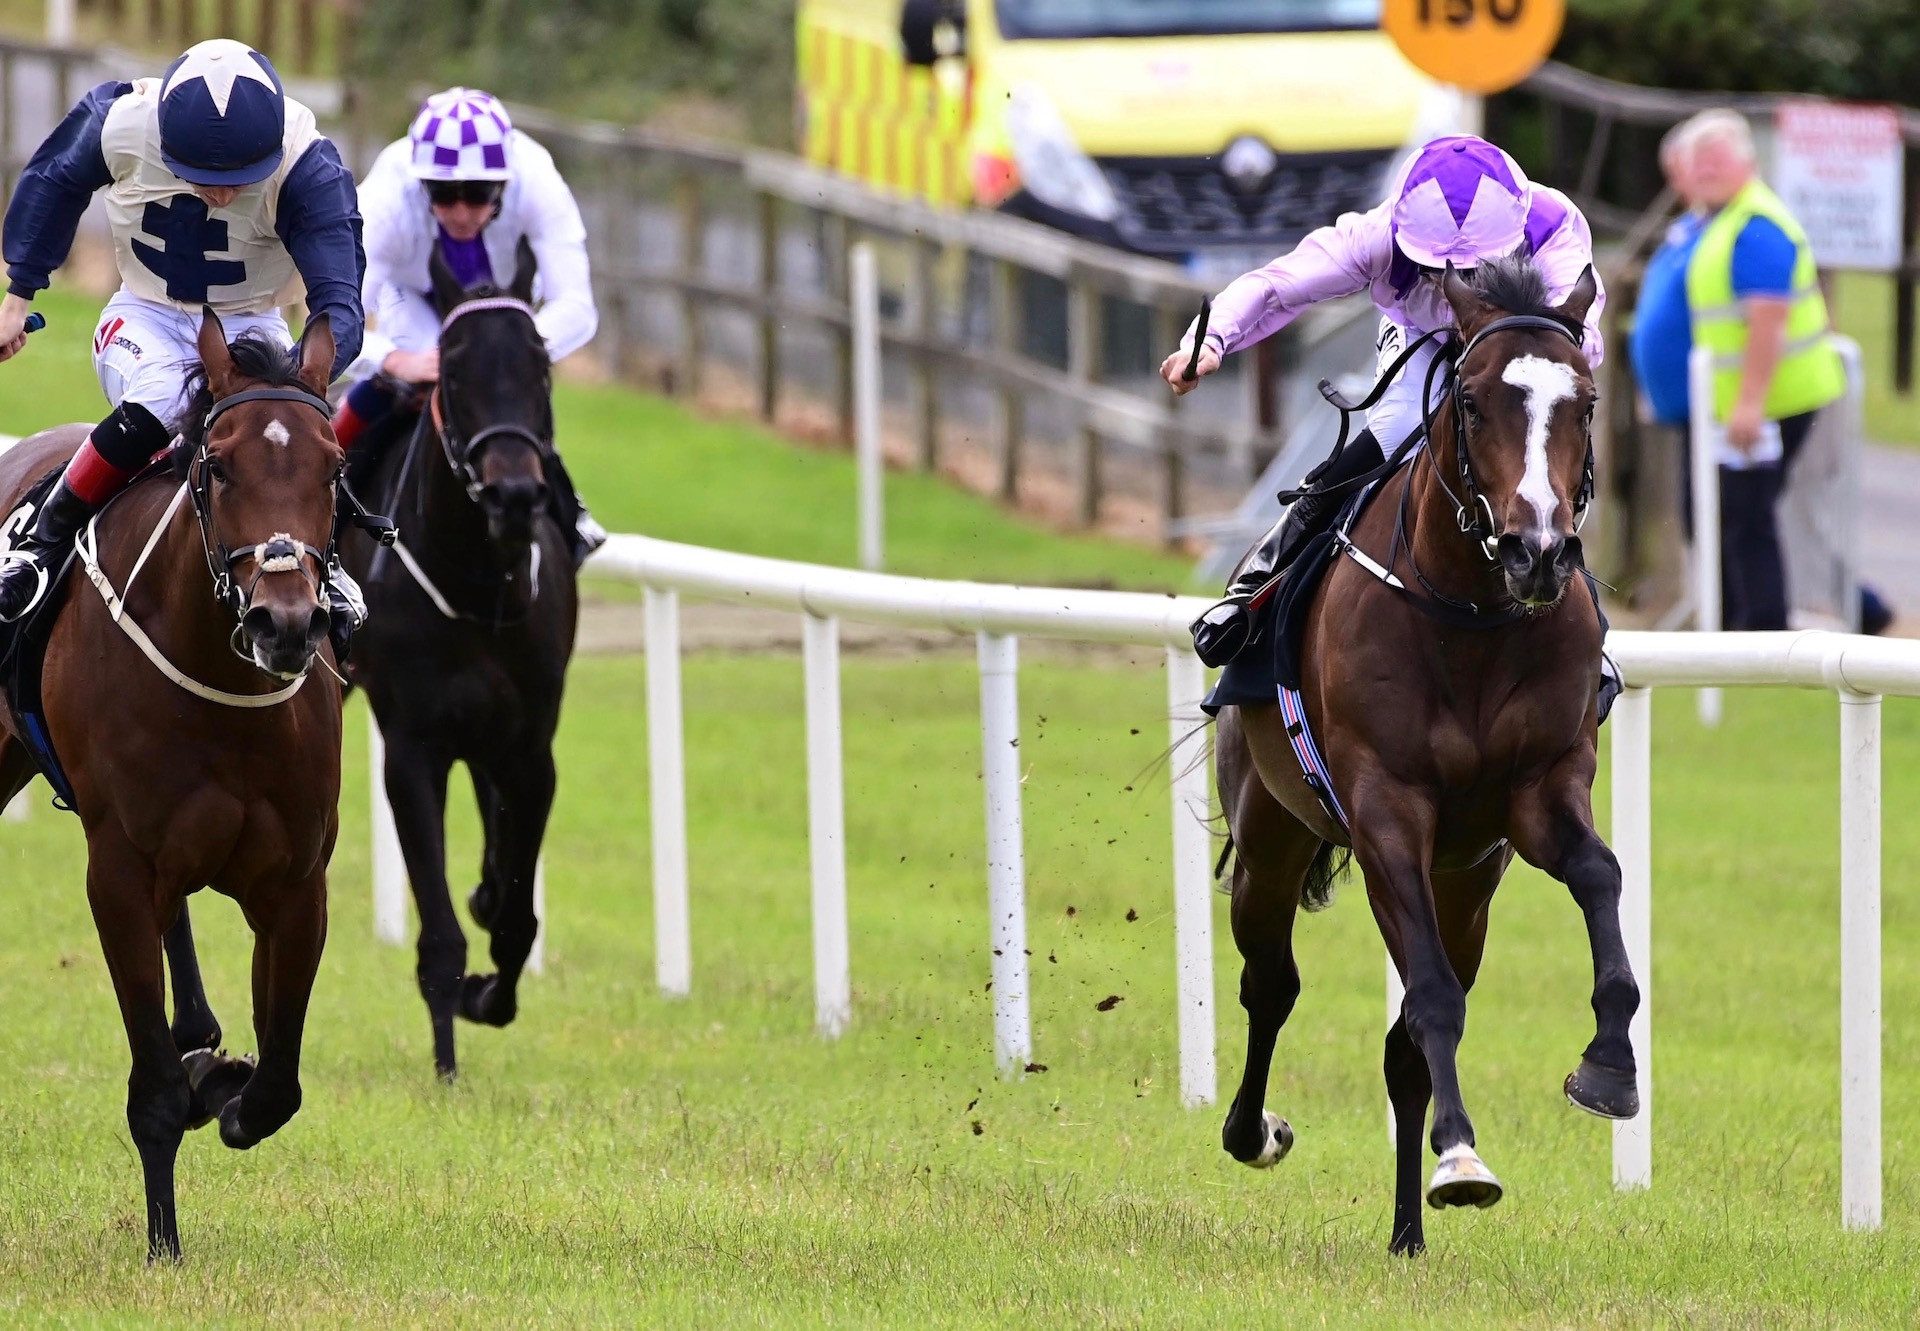 All Things Nice (Sioux Nation) Wins The Fillies Maiden At Bellewstown